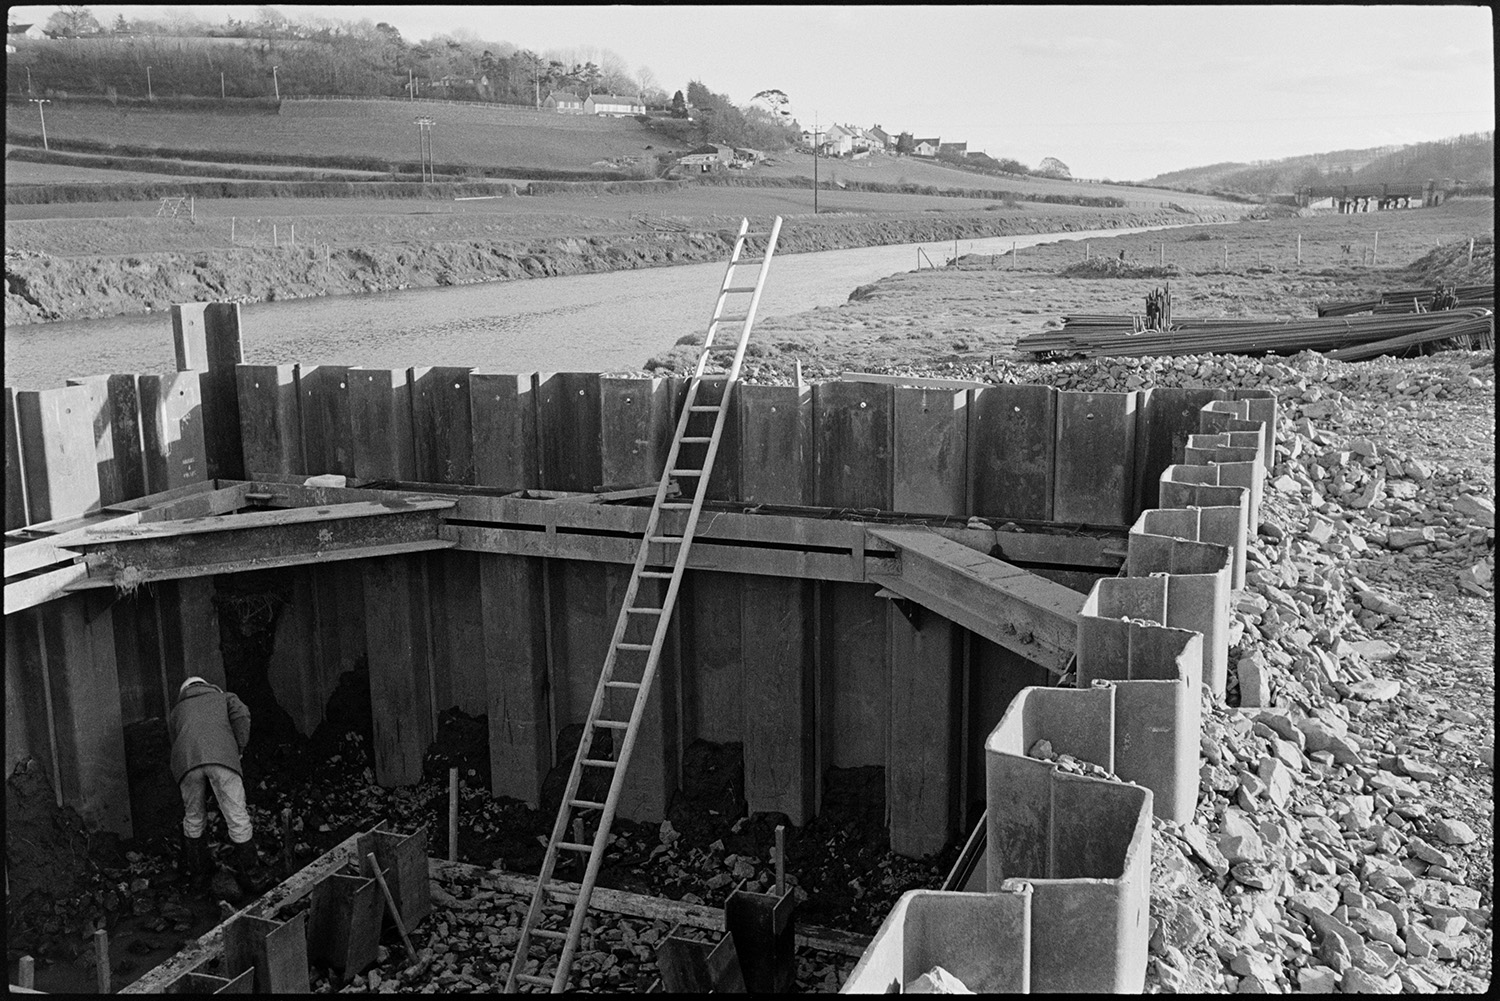 Engineers working on new river bridge for motorway link road.
[A man working on the bank of the River Taw near Barnstaple, inside the construction of the supports for a bridge being built across the river.]